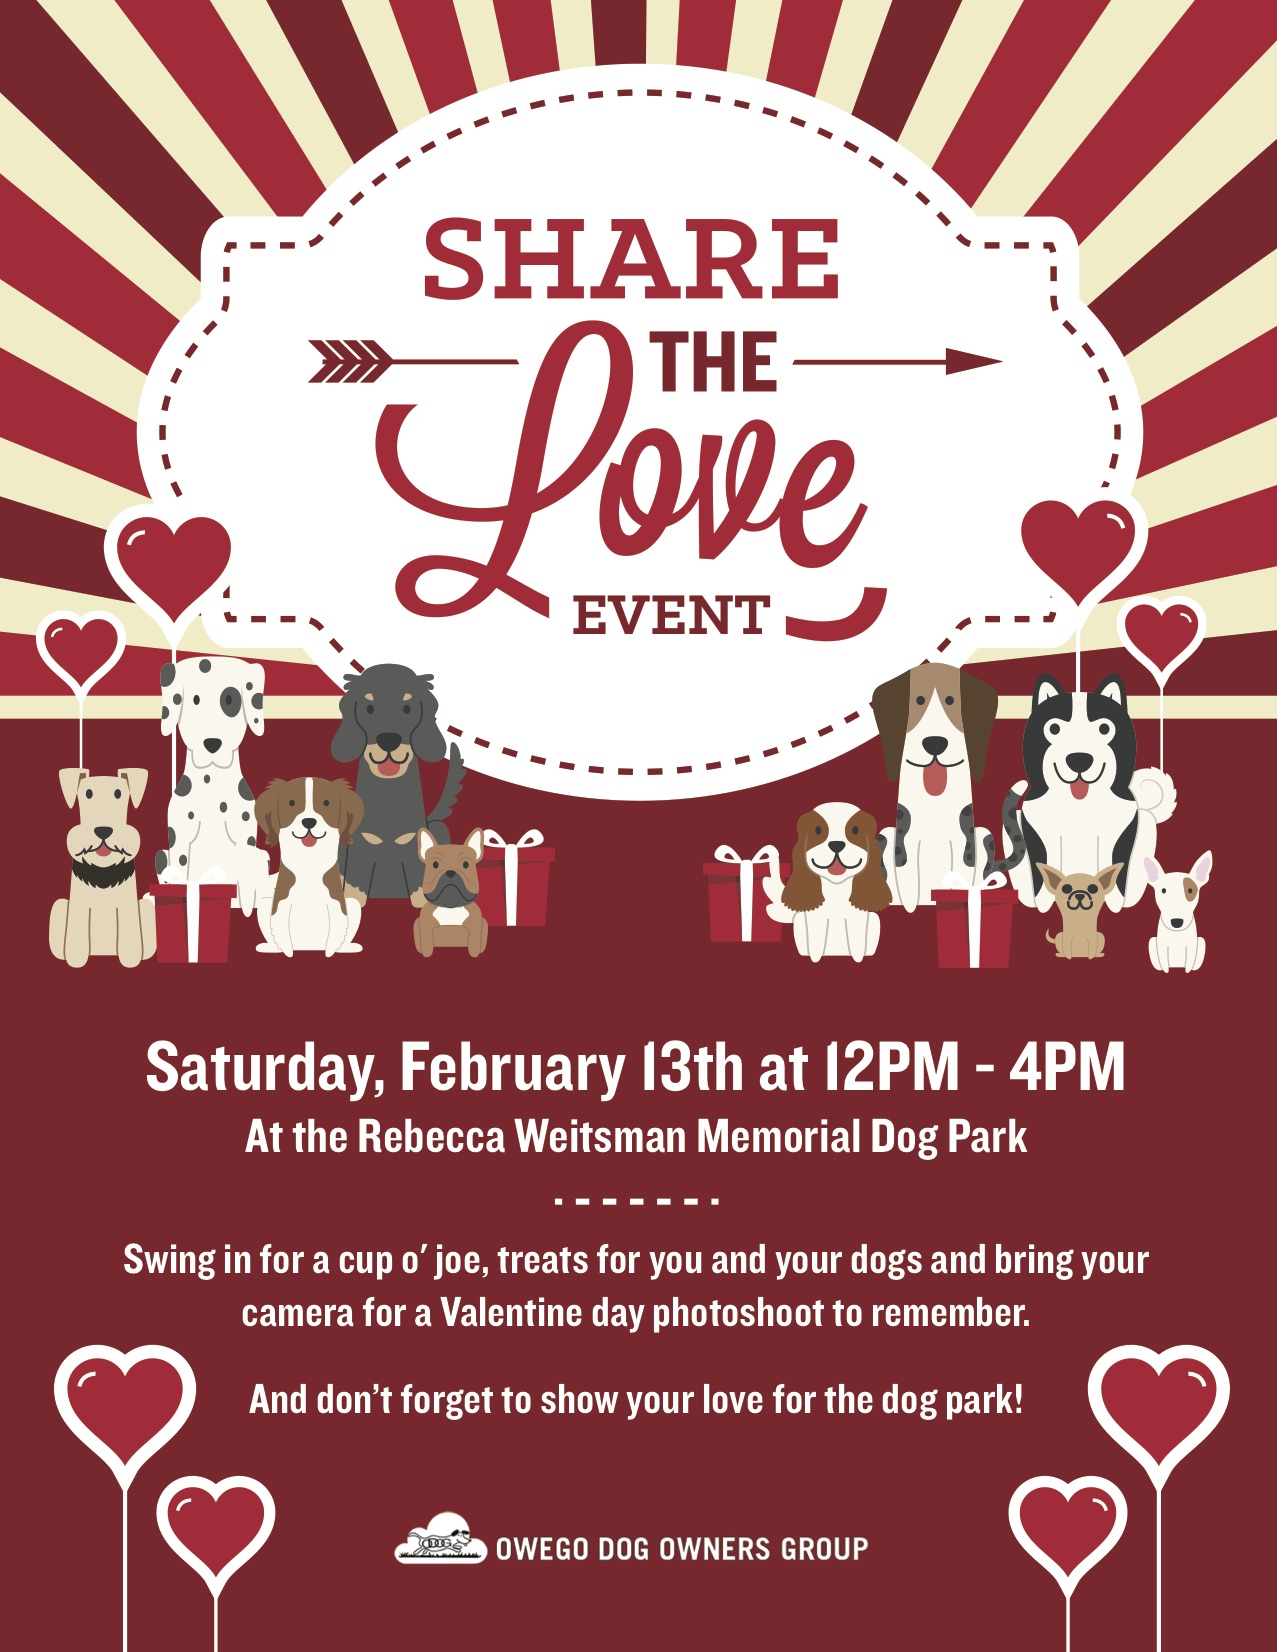 ODOG to host ‘Share the Love’ event